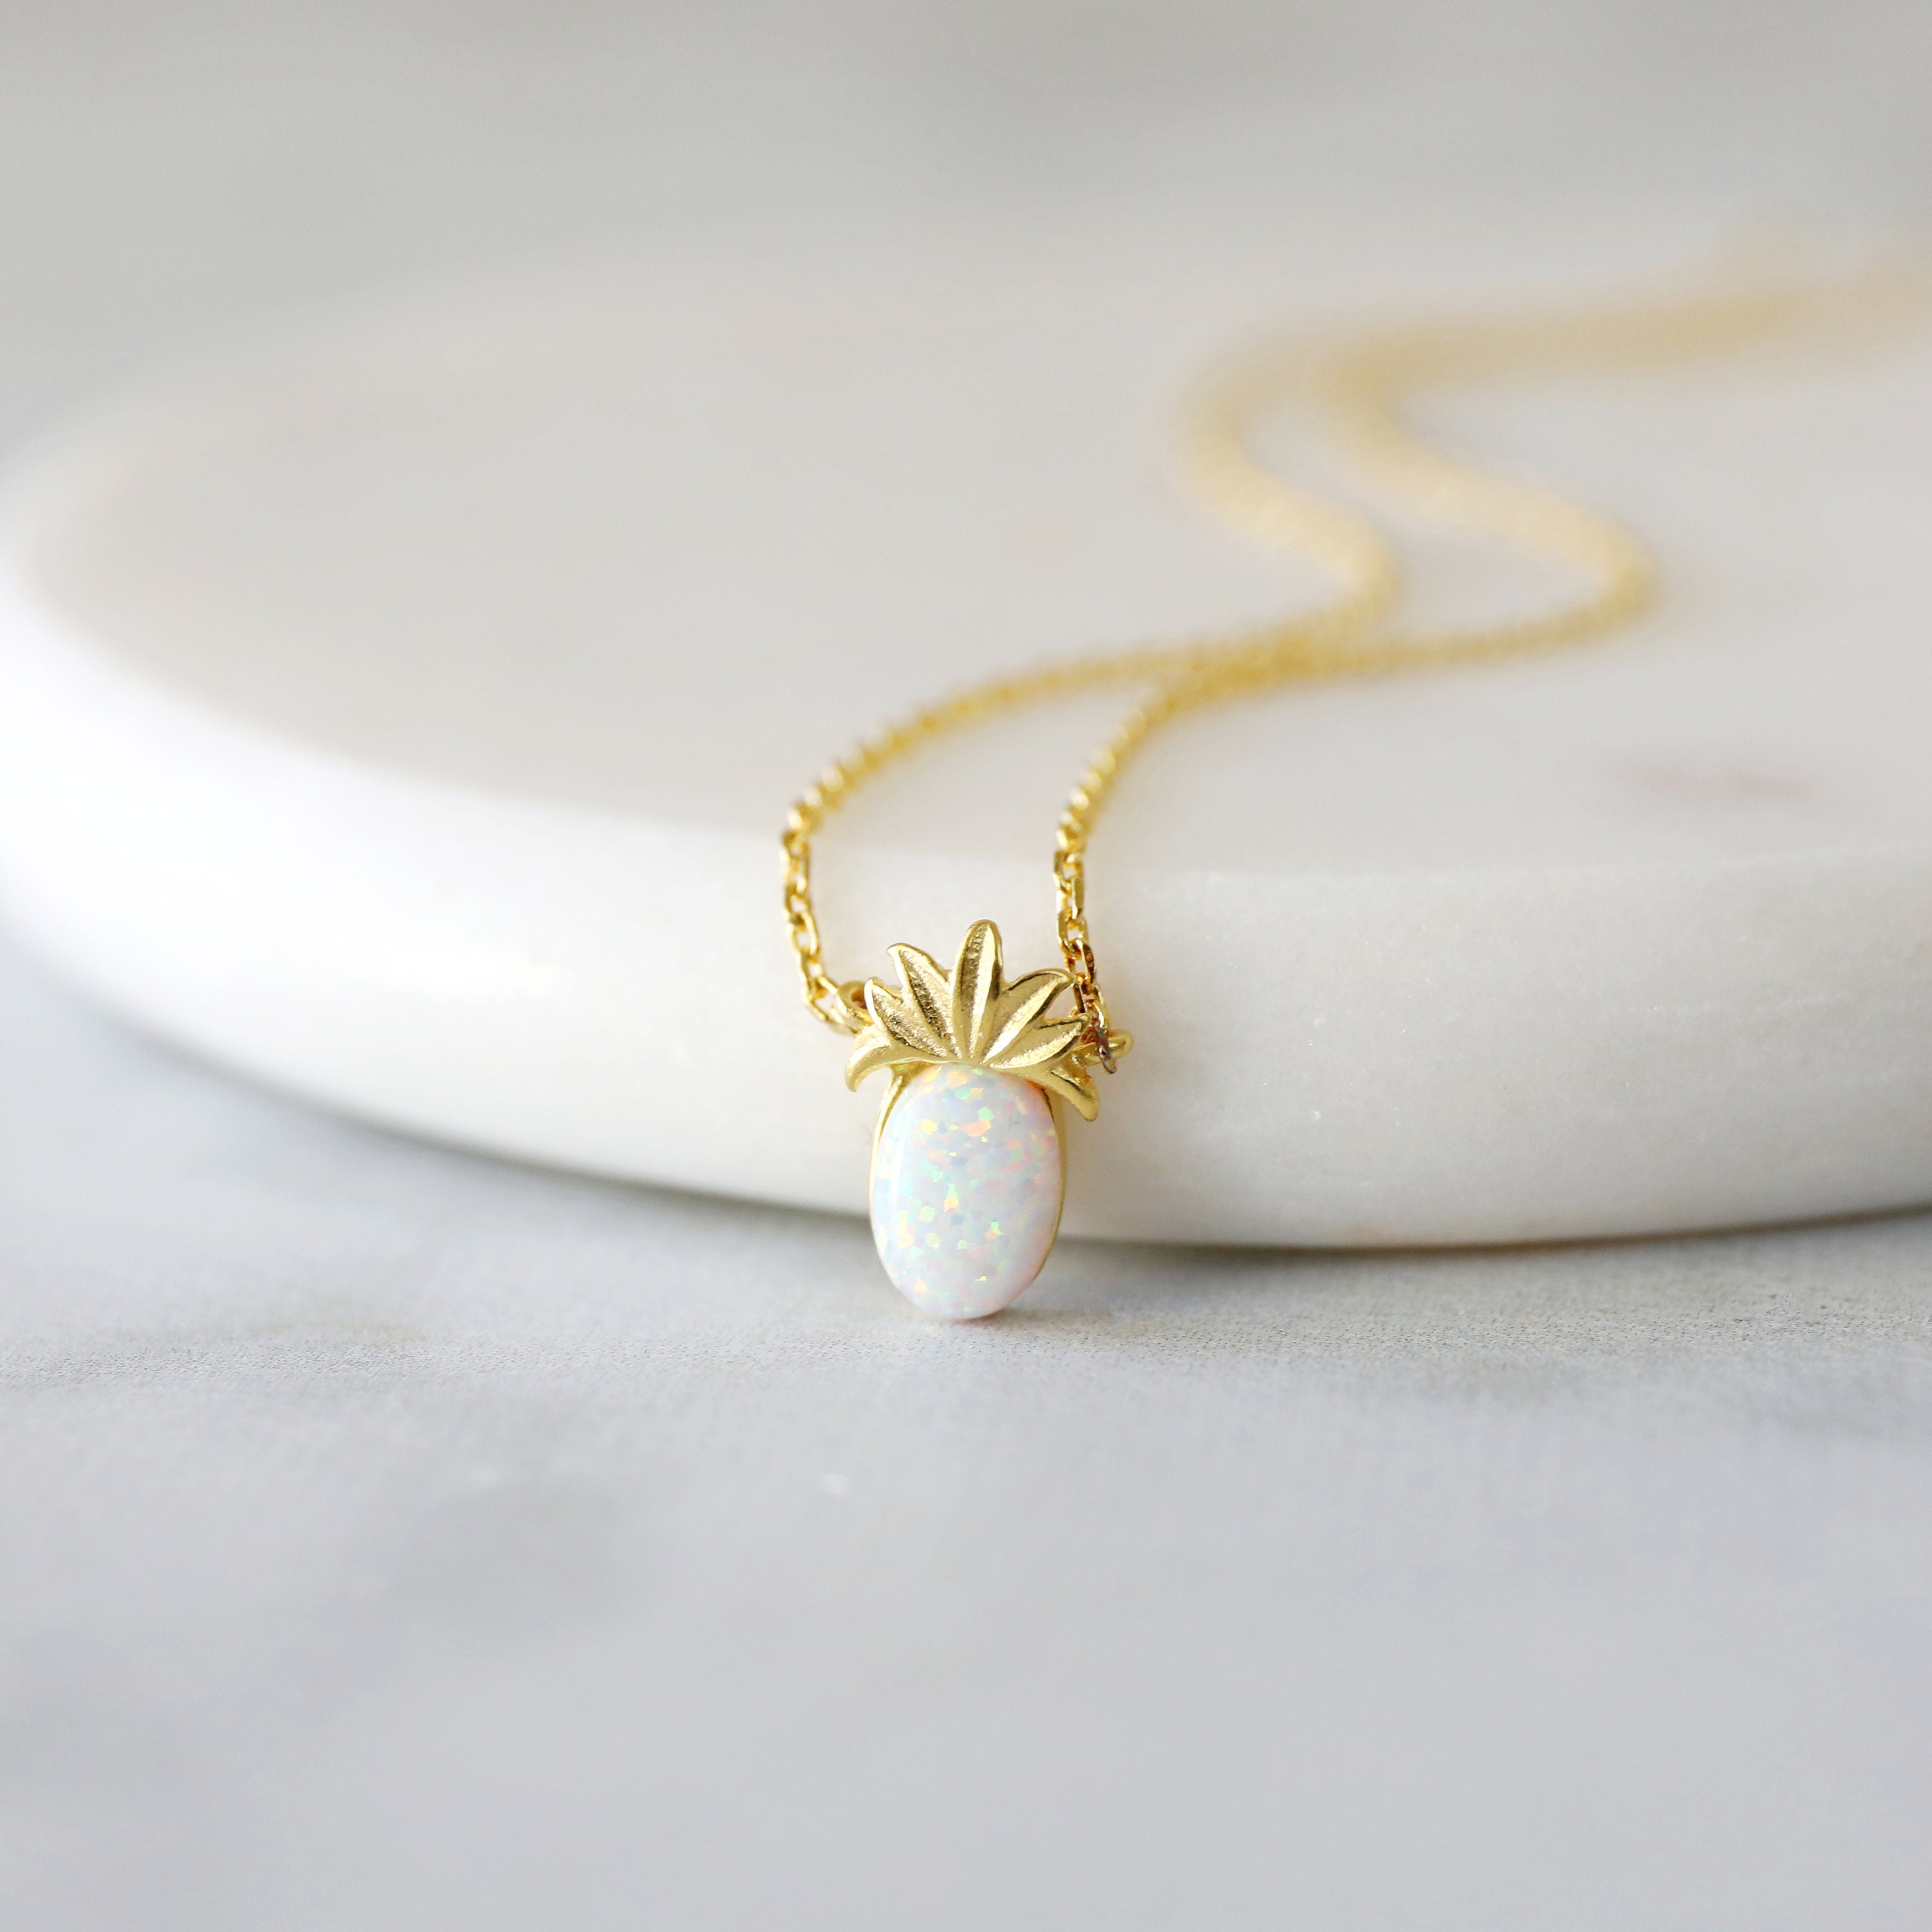 Dainty Pineapple necklace  Gifts for Women  Necklace for Mom  Bridesmaid necklace  Birthday Gift  Bridesmaid Gift Ideas.